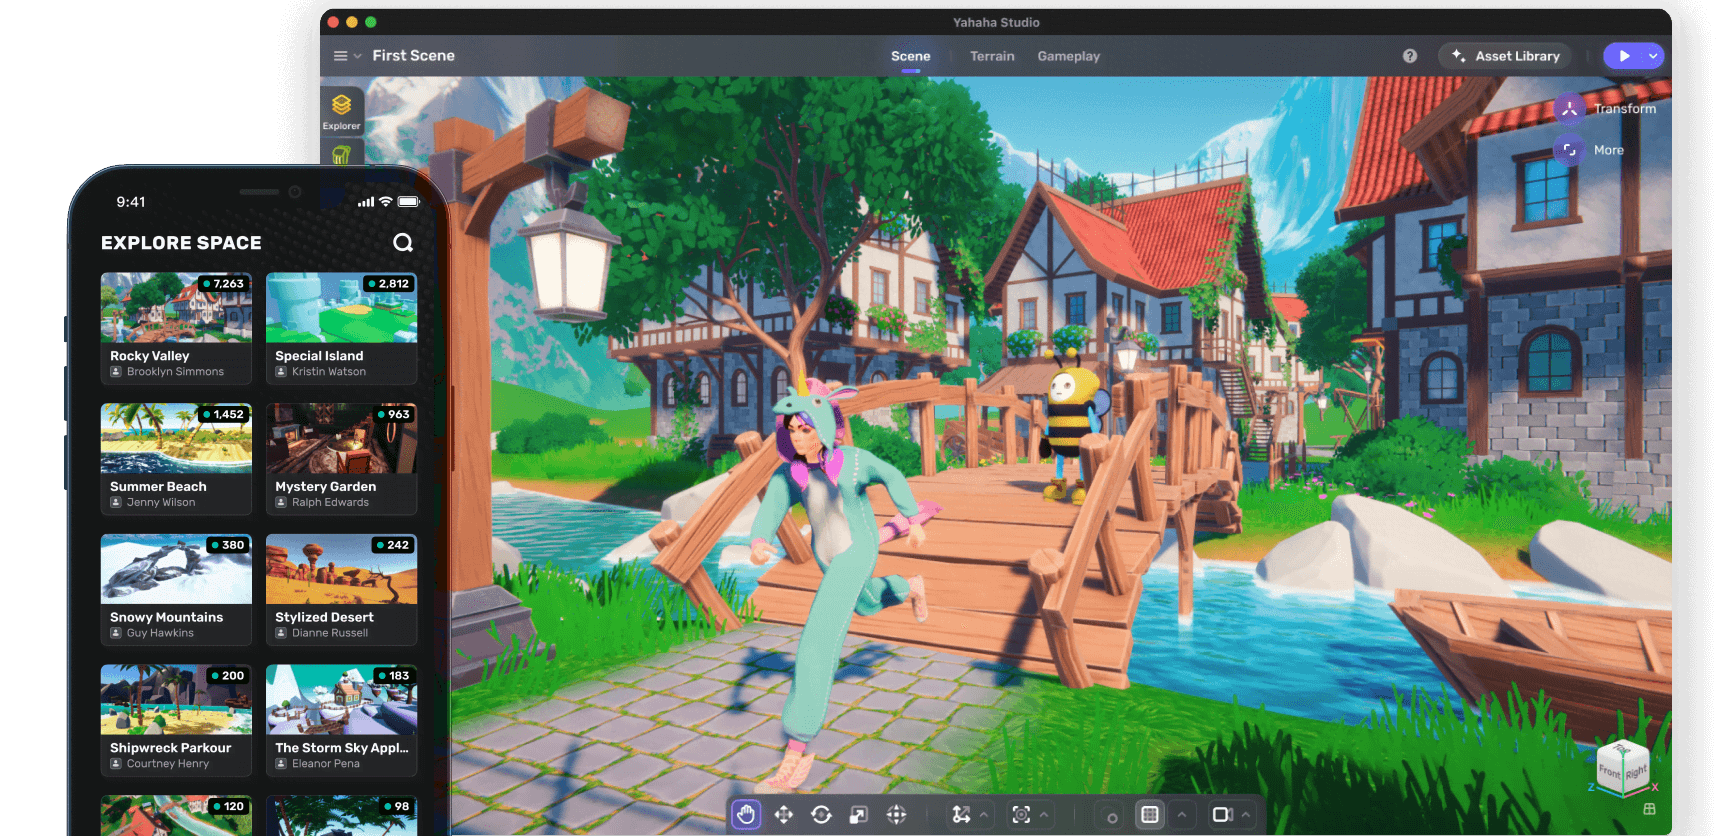 YAHAHA is a 3D creation free platfom, enables users to creat multiplayer games and scence without coding, design and devolping uniqe own metaverse.